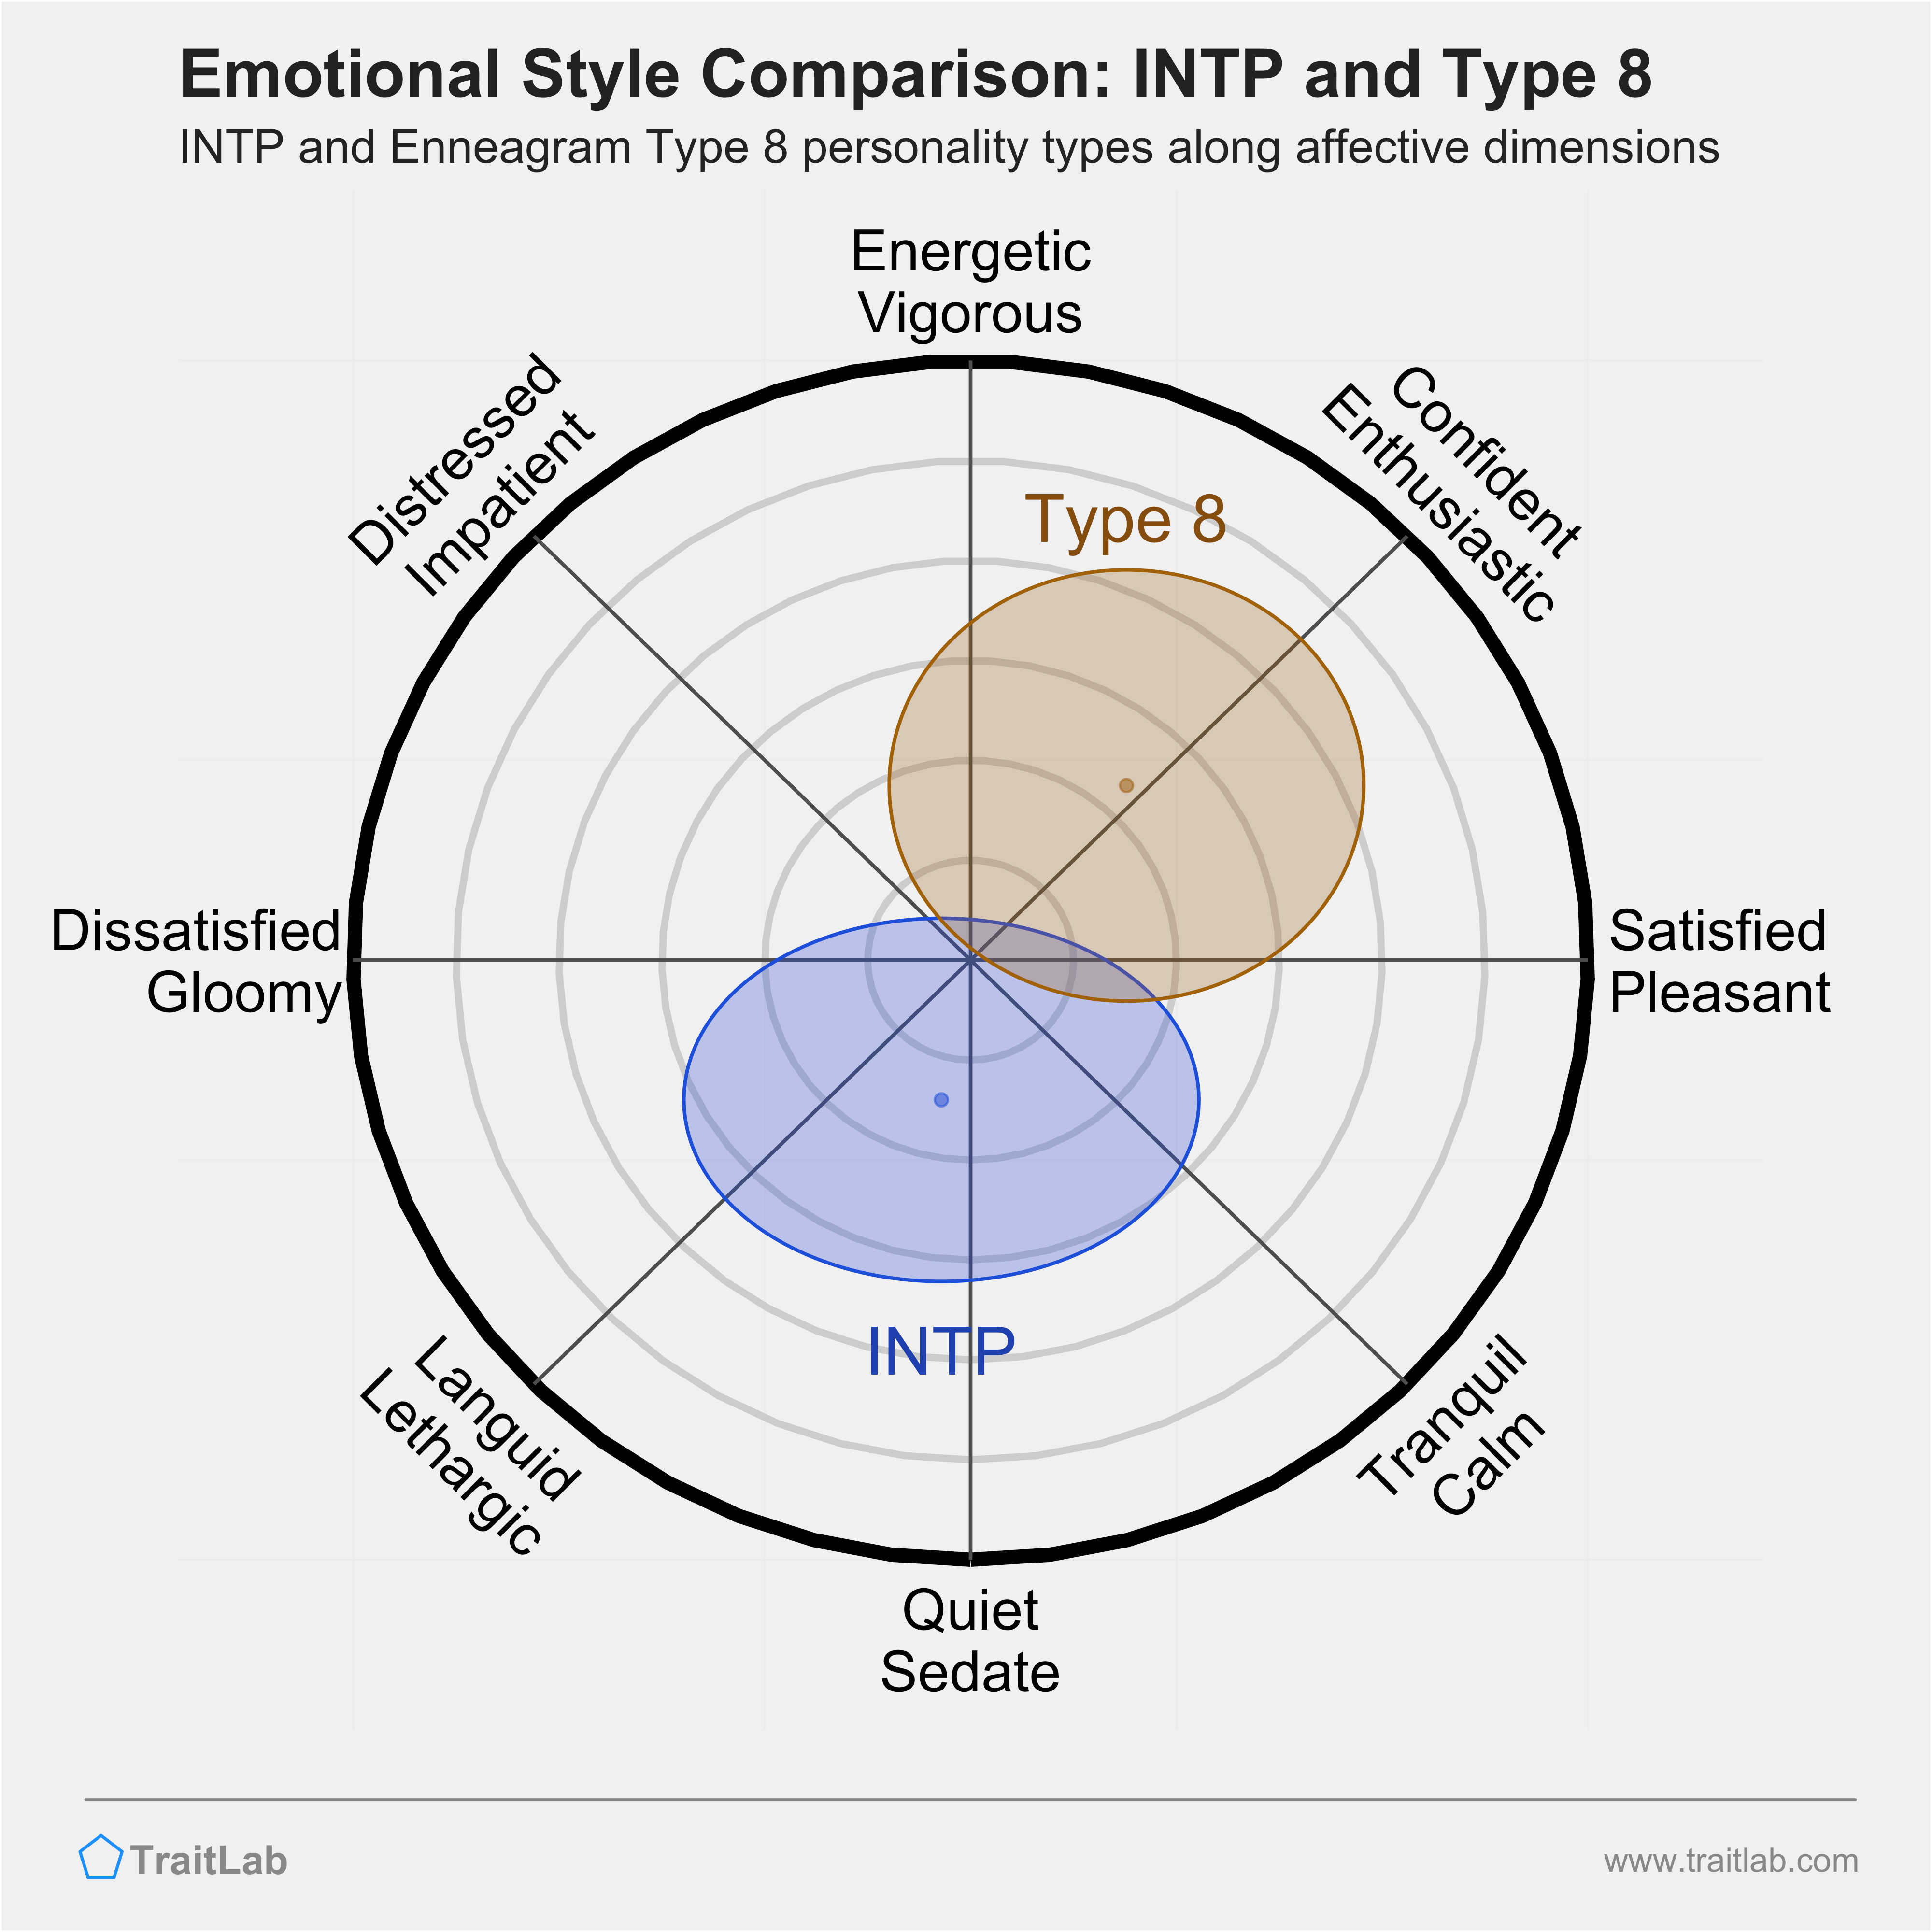 INTP and Type 8 comparison across emotional (affective) dimensions